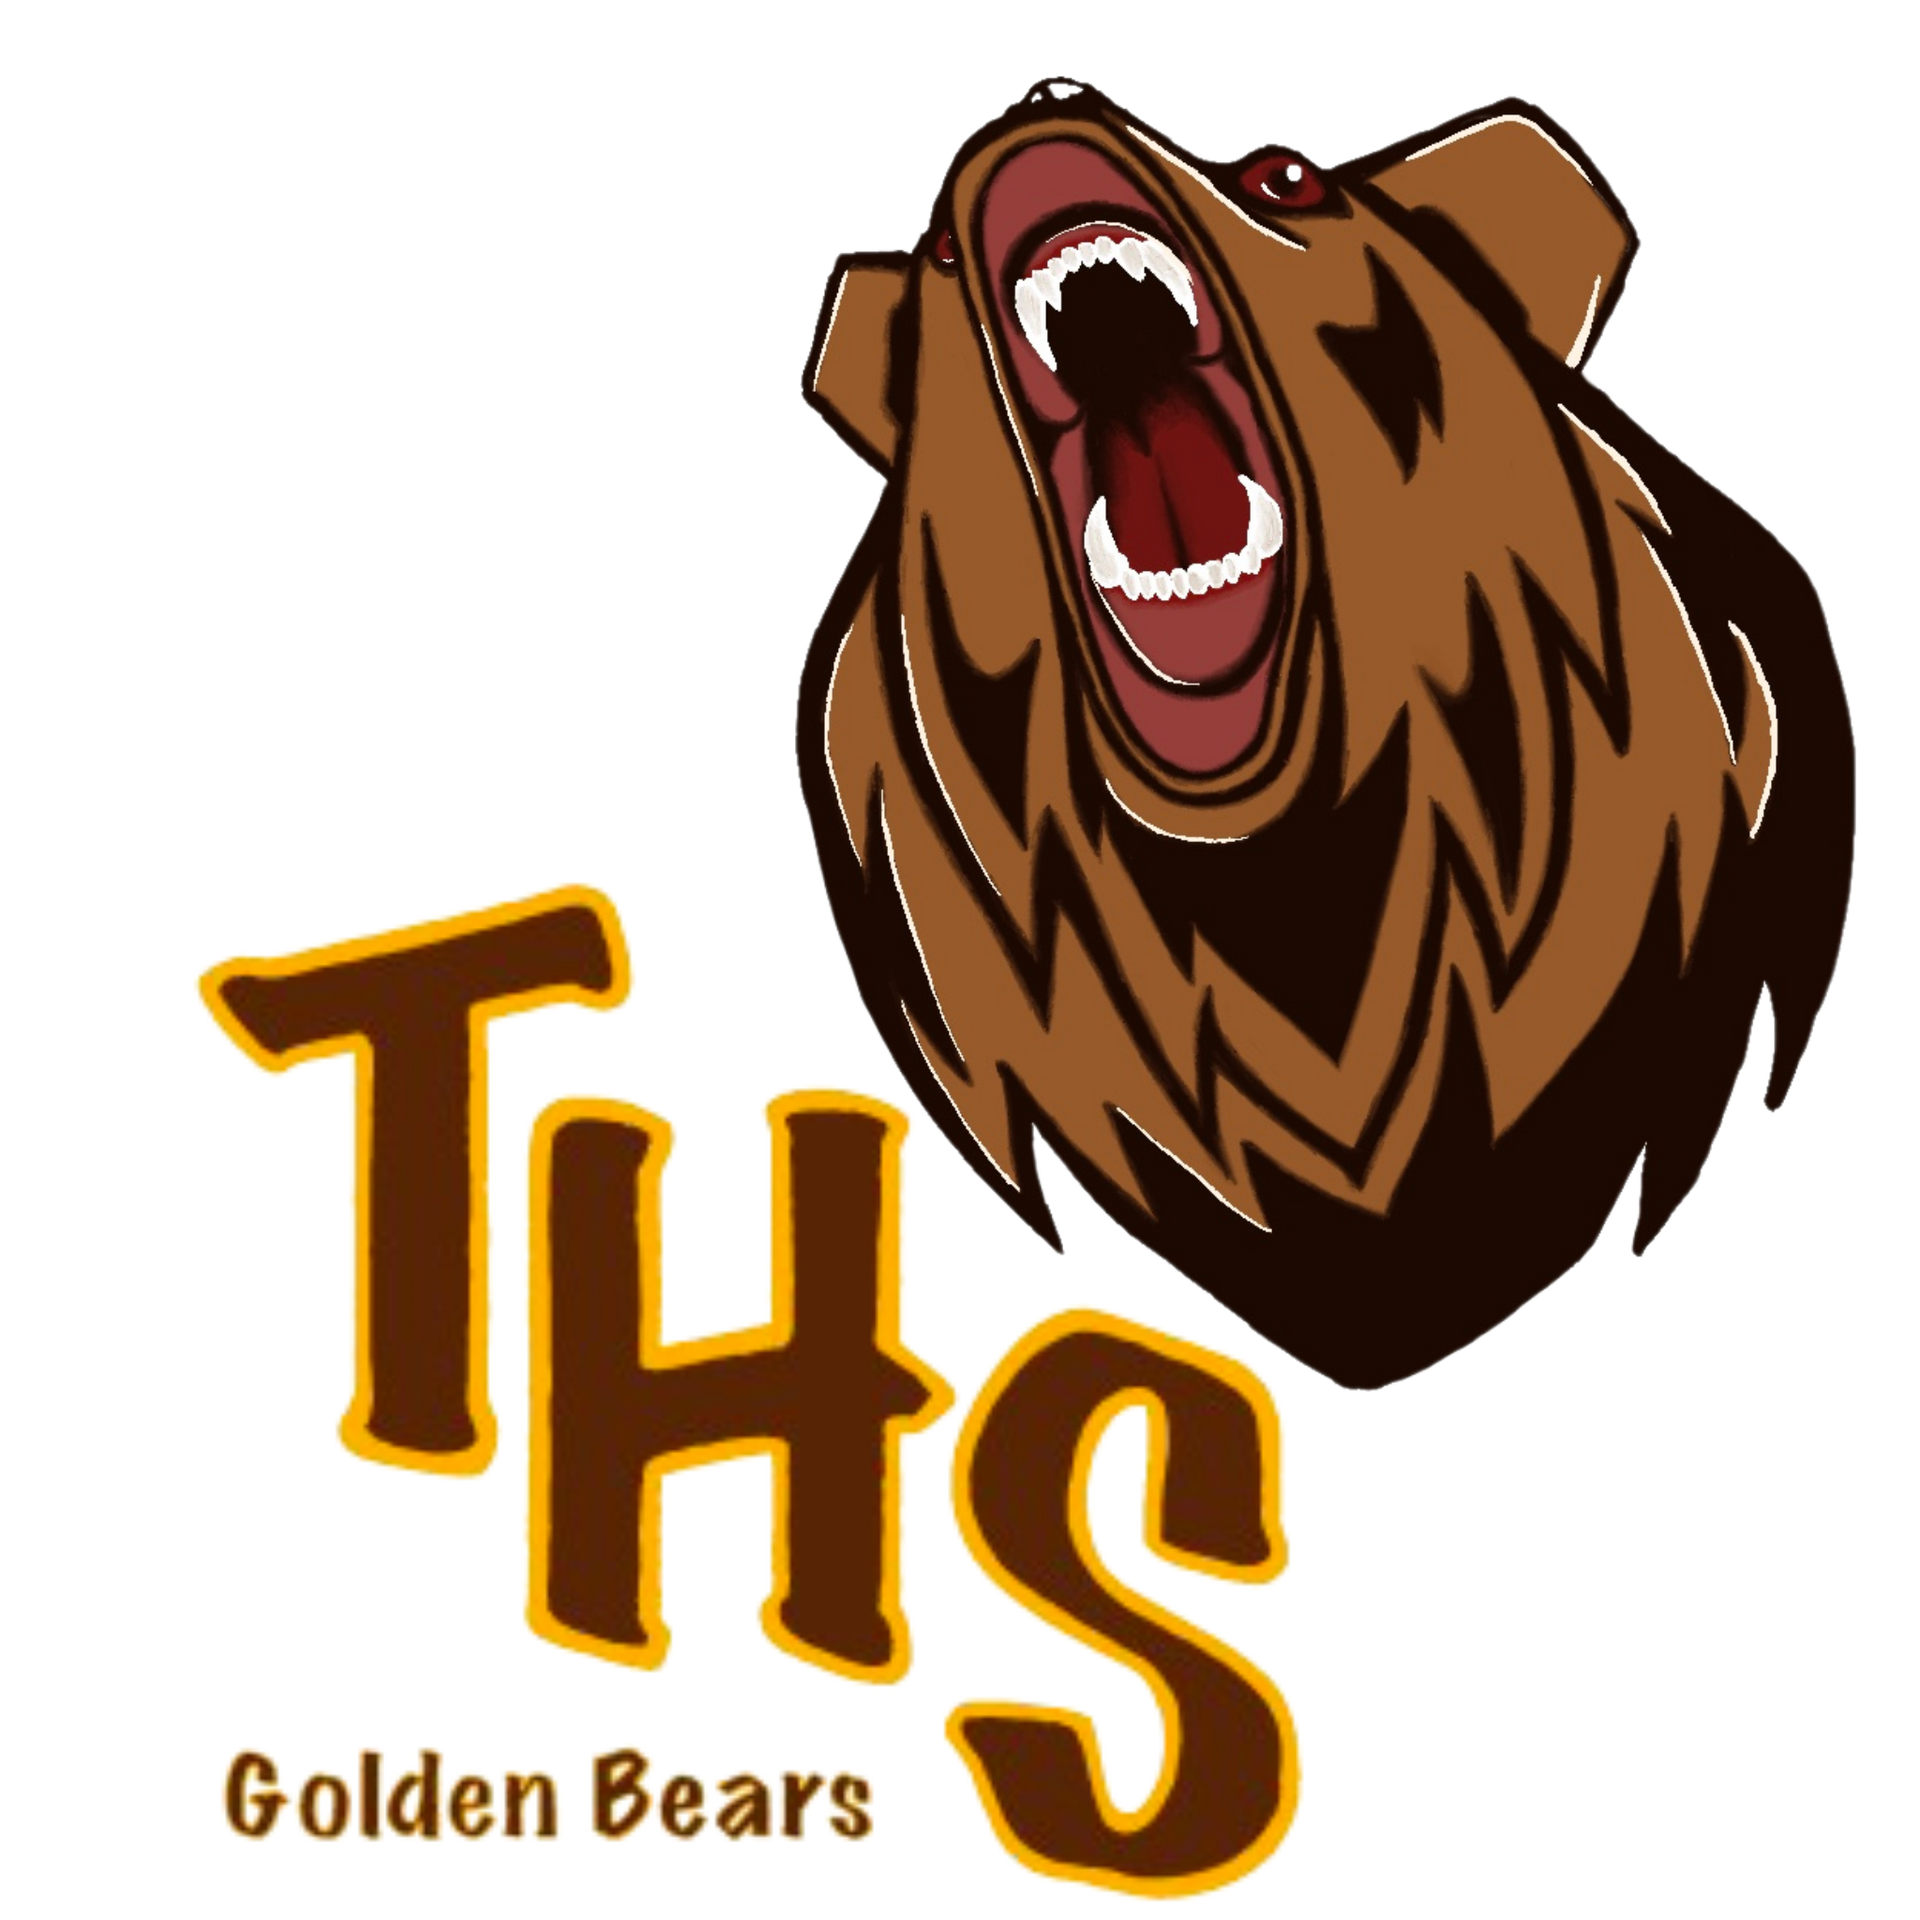 a logo for the golden bears shows a bear with its mouth open